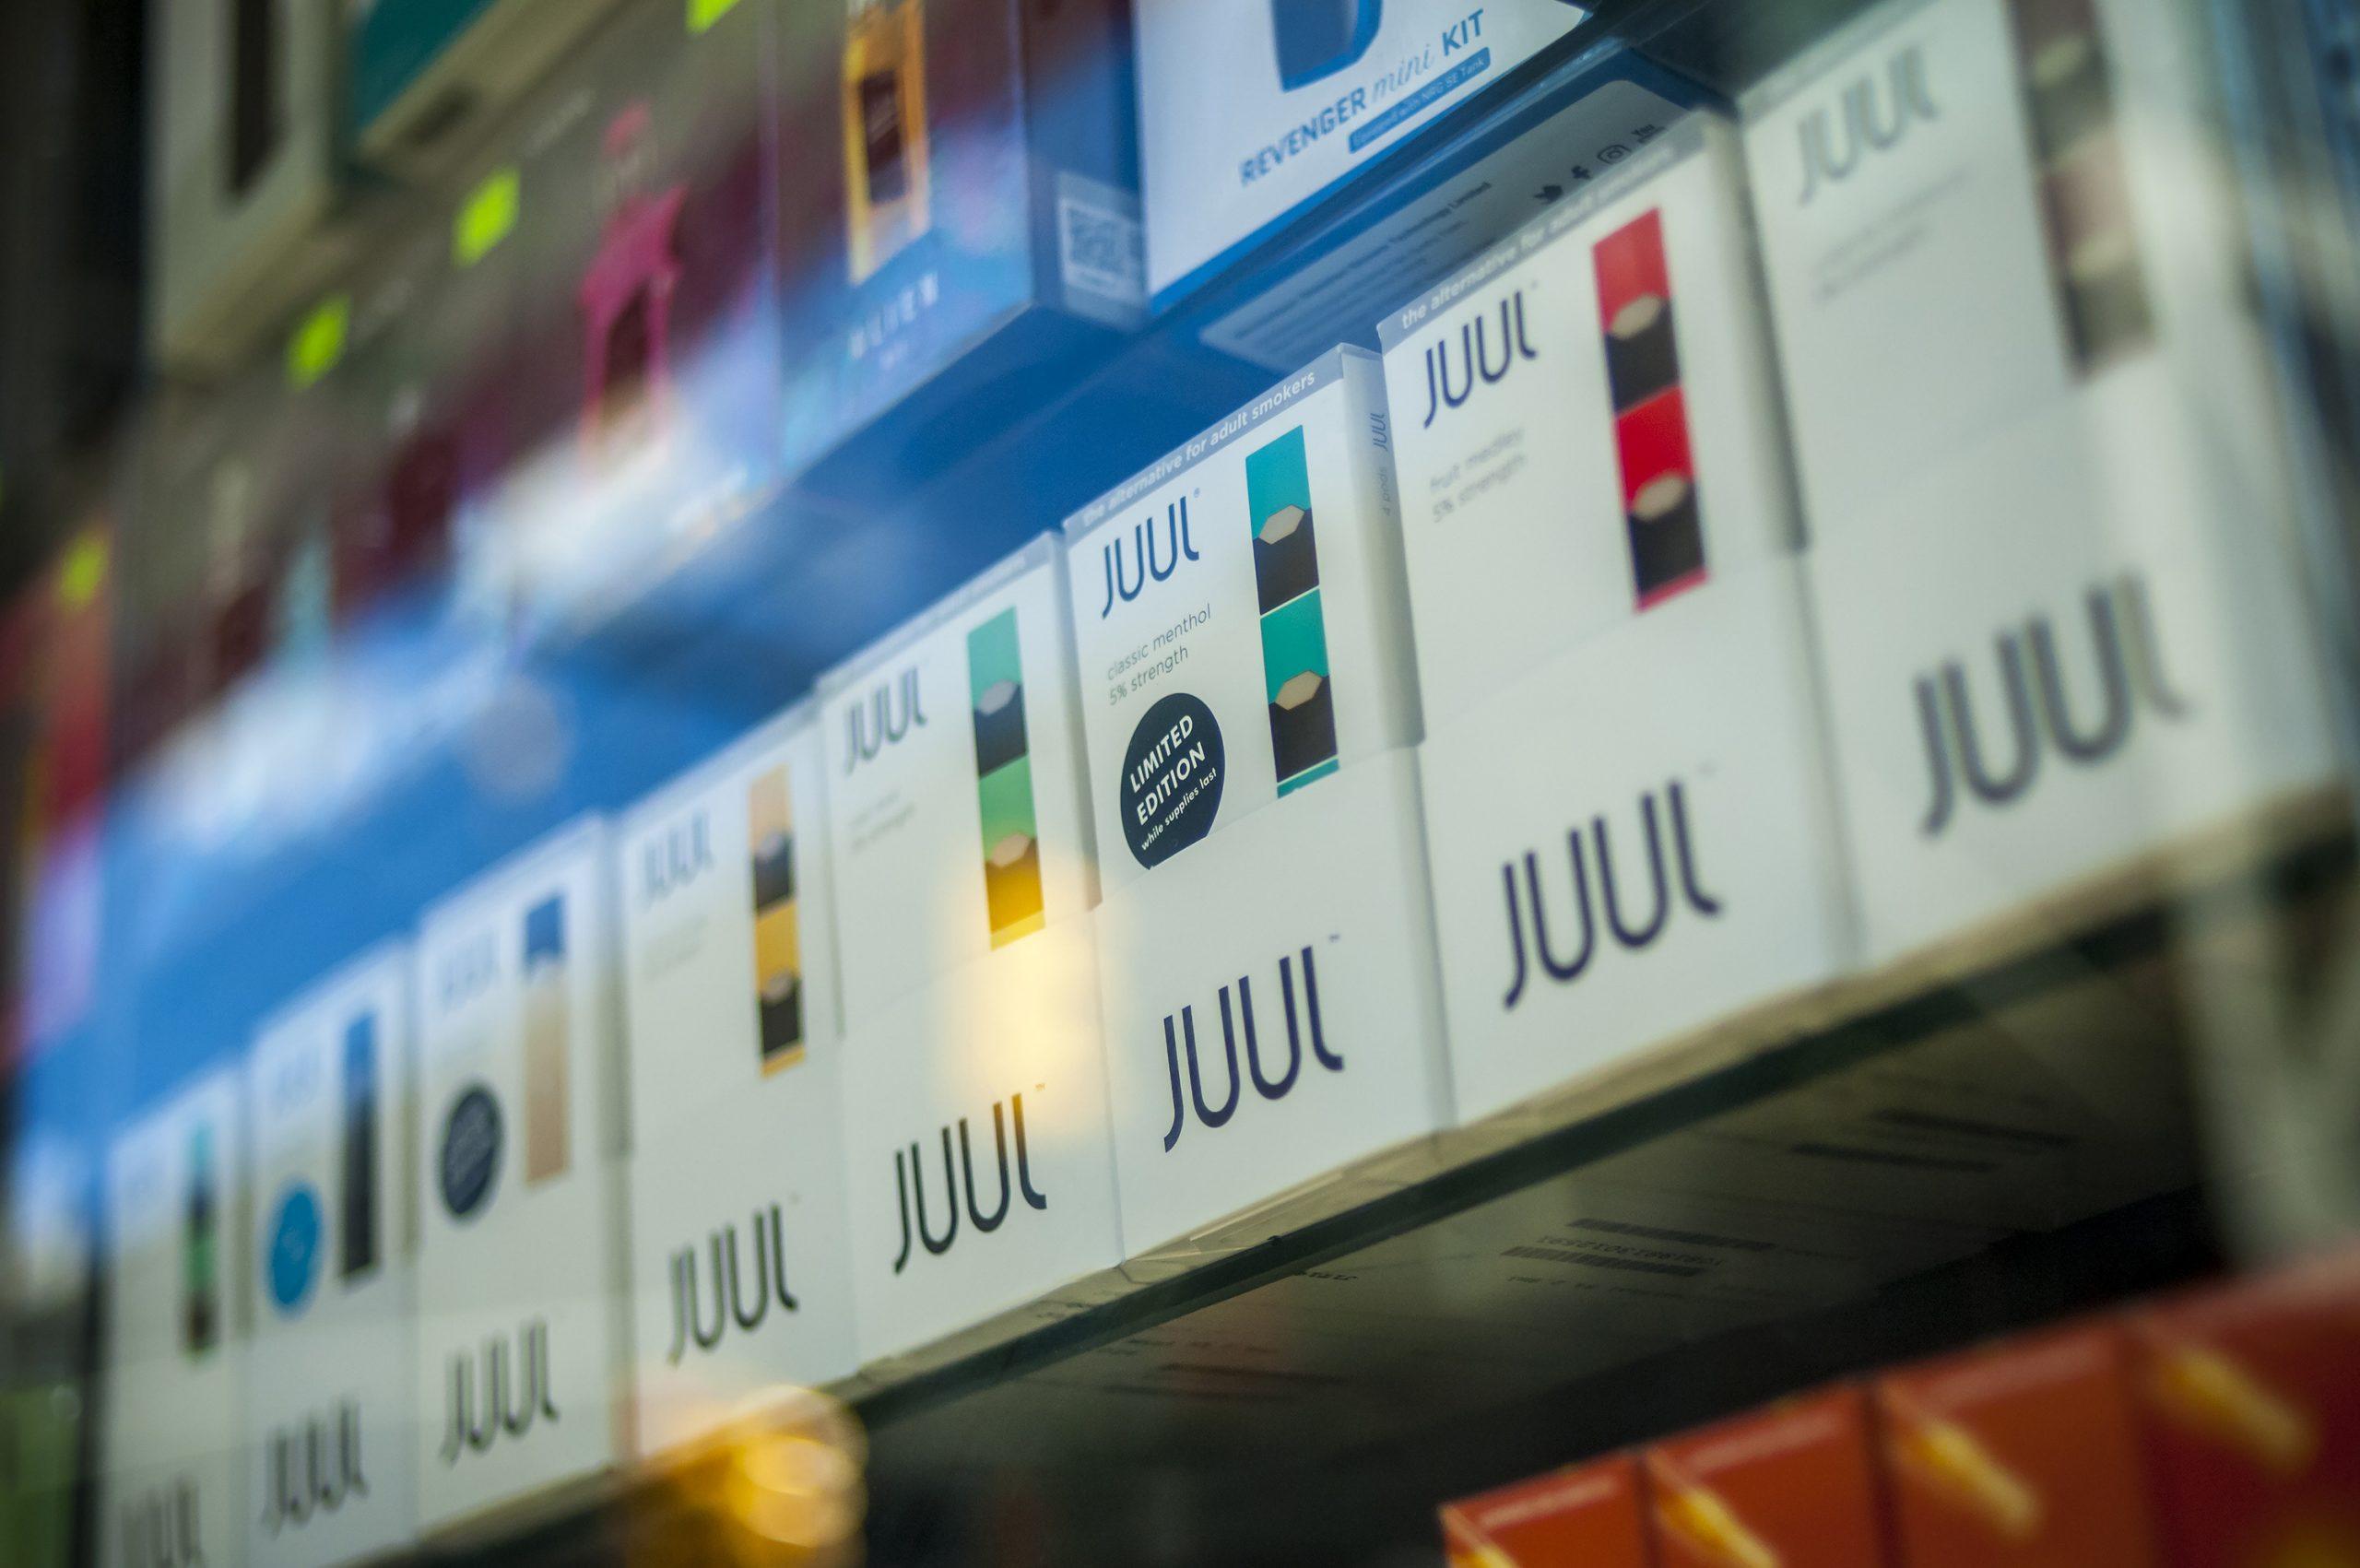 A selection of the popular Juul brand vaping supplies on display in the window of a vaping store in New York on Saturday, March 24, 2018. (Richard B. Levine/Sipa USA/TNS)